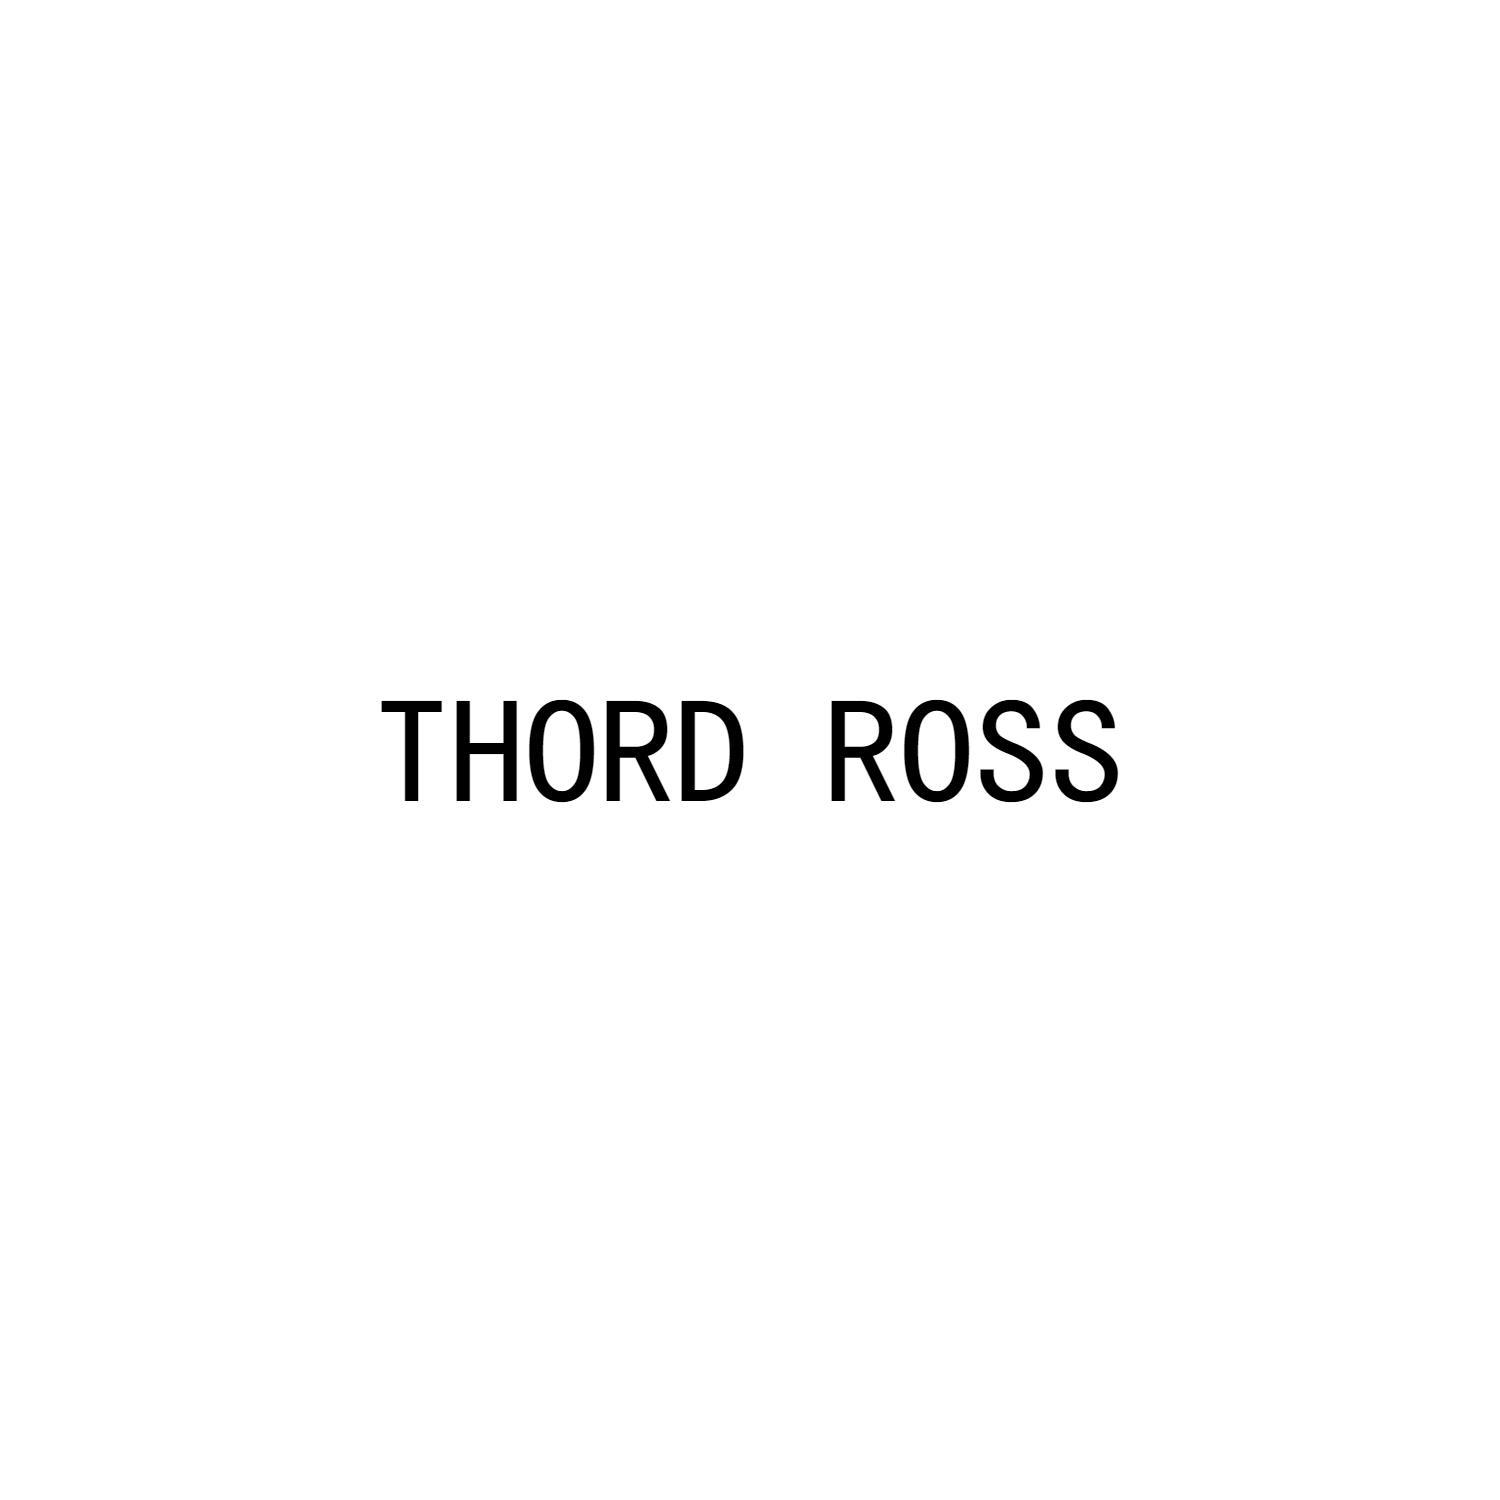 THORD ROSS